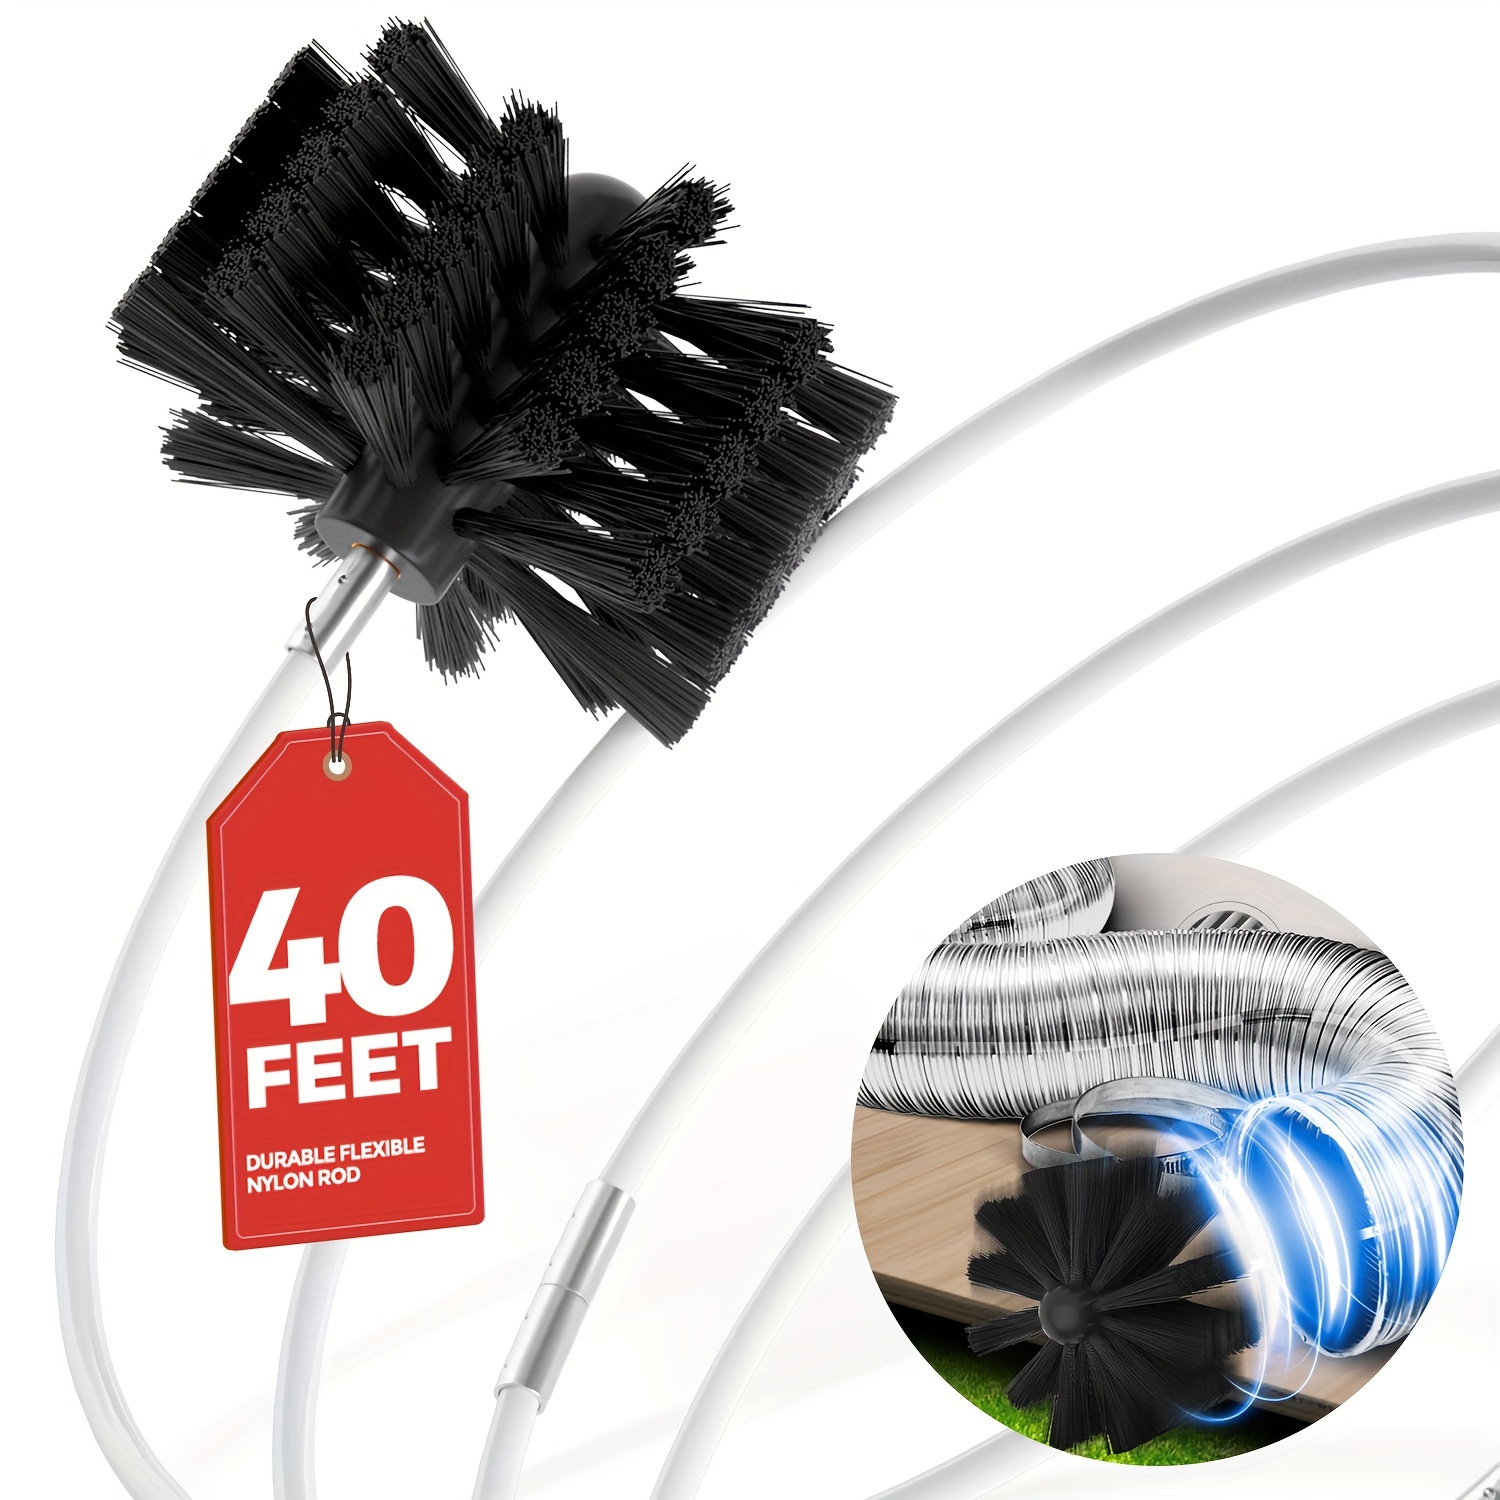 dryer vent cleaning brush, lint remover